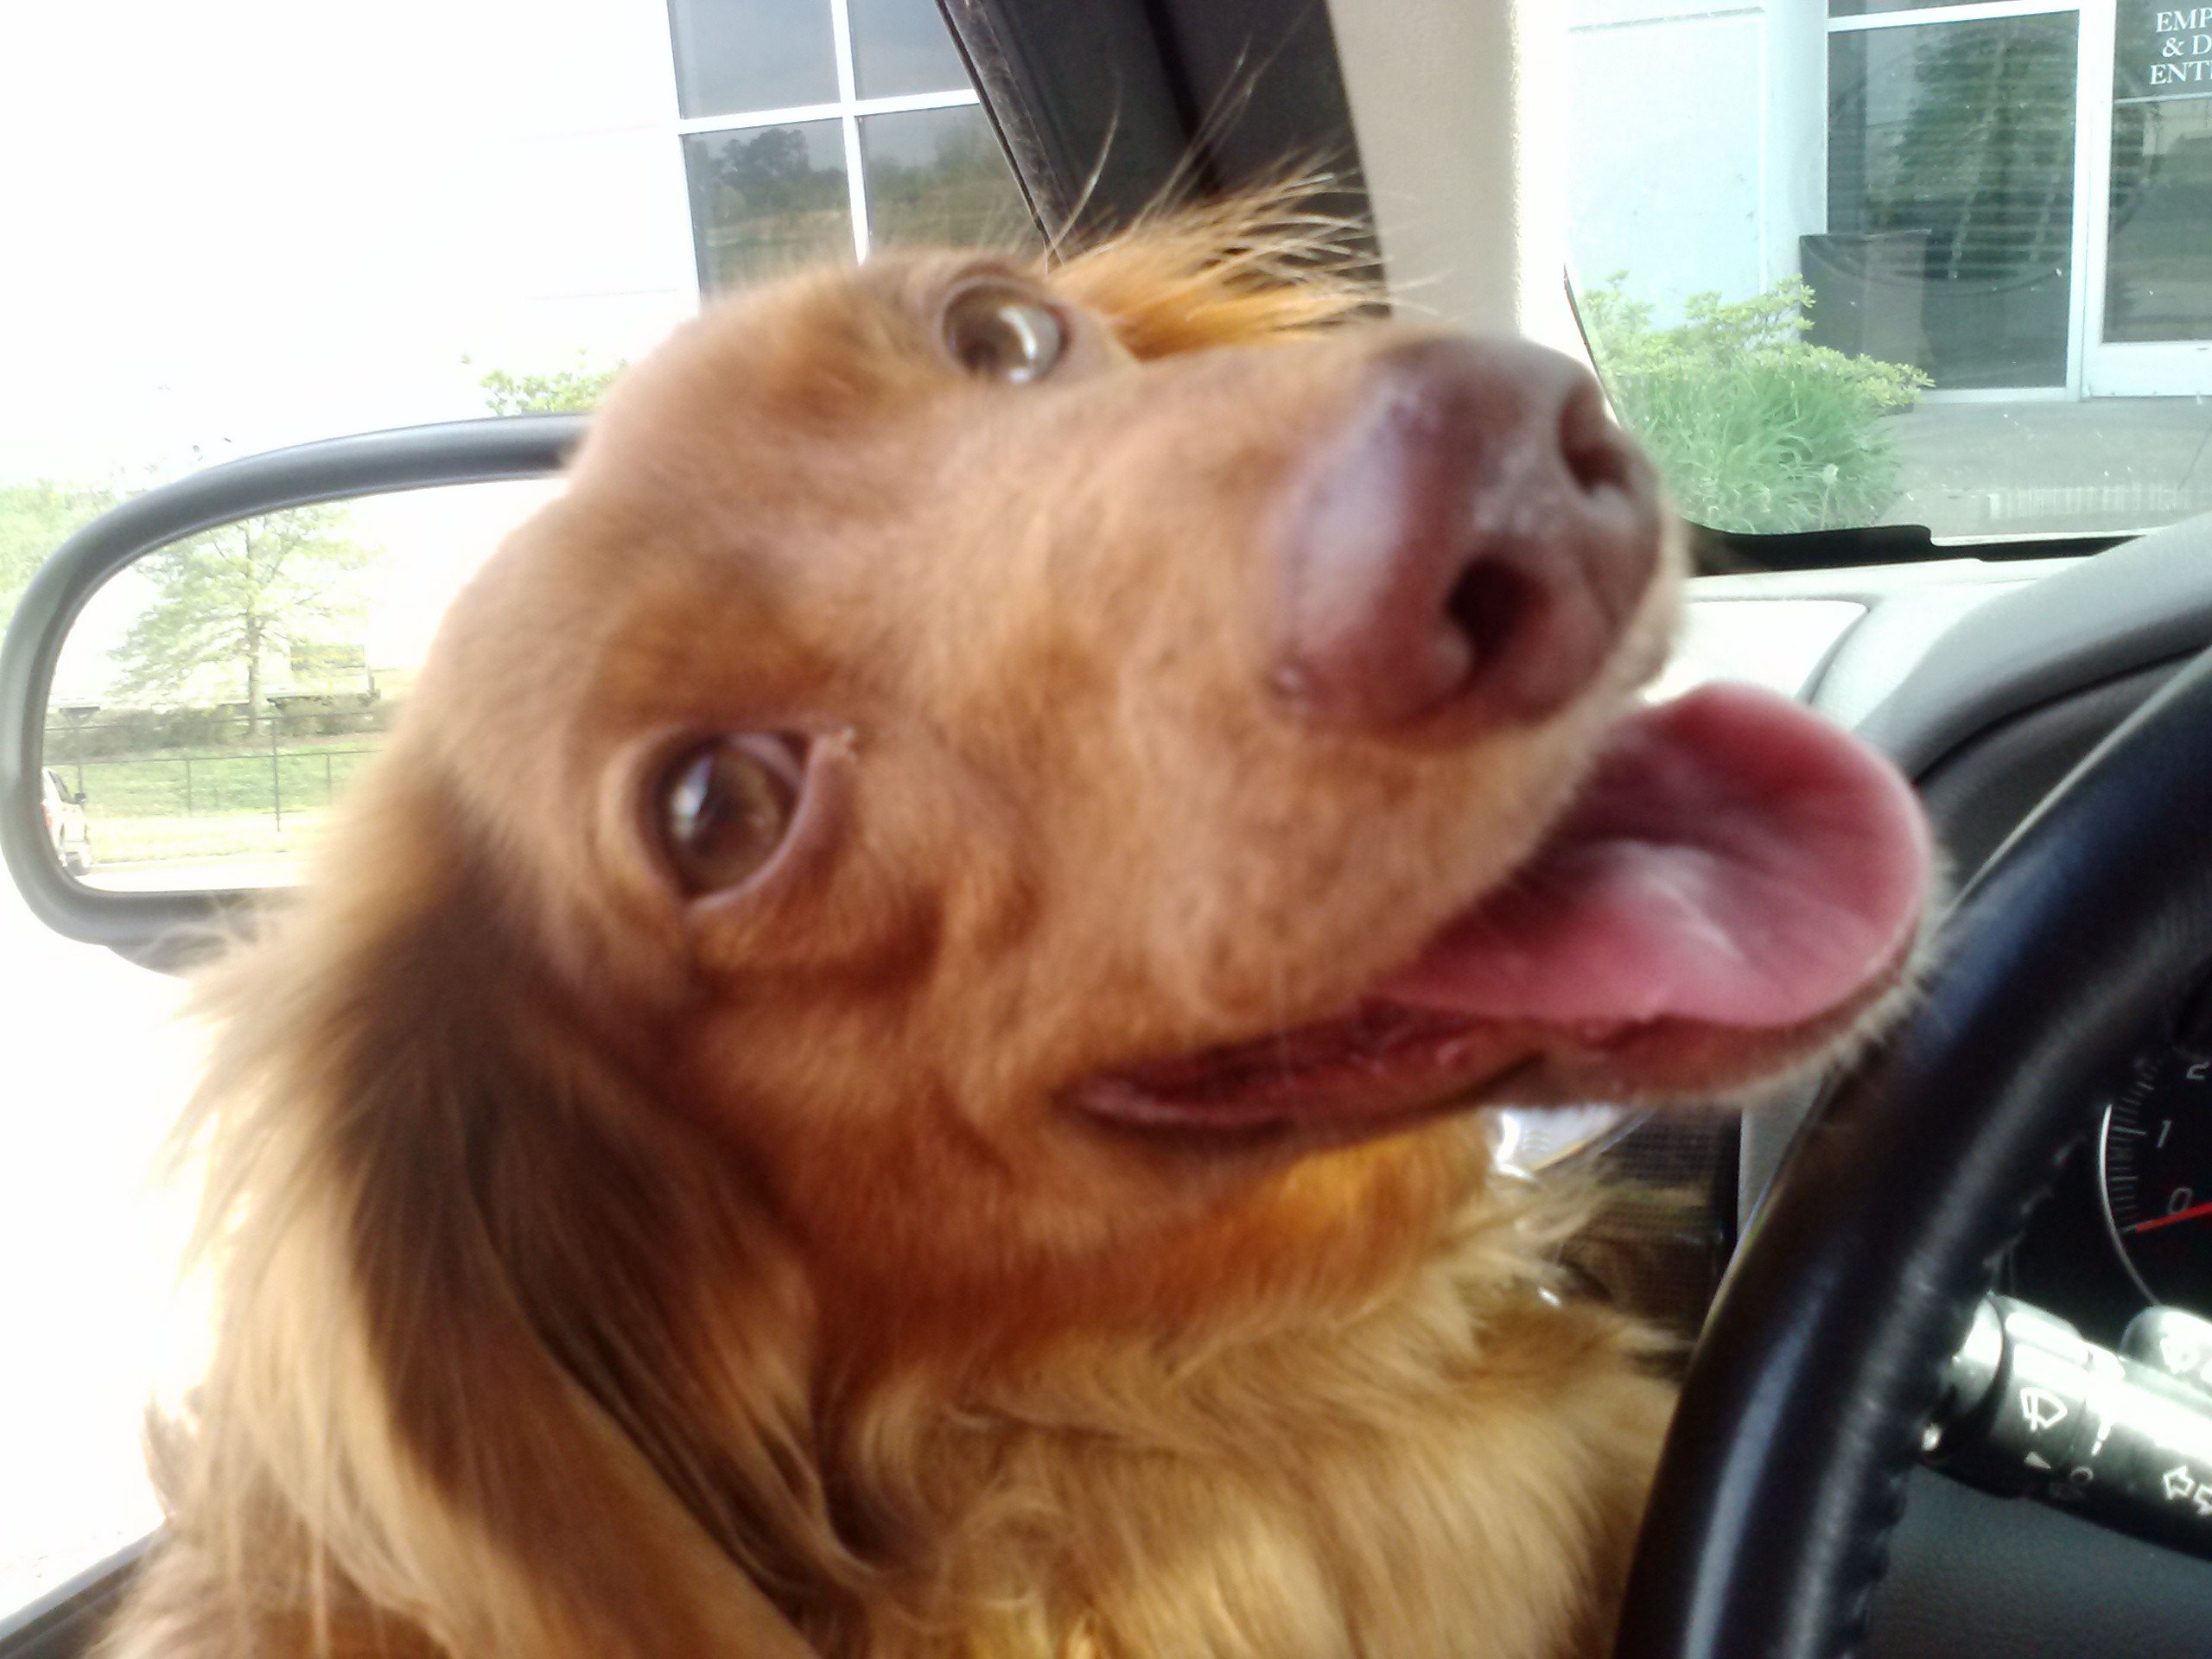 Pumpkin made this face because he got to ride in the car.  He LOVES car rides | Animals Zone